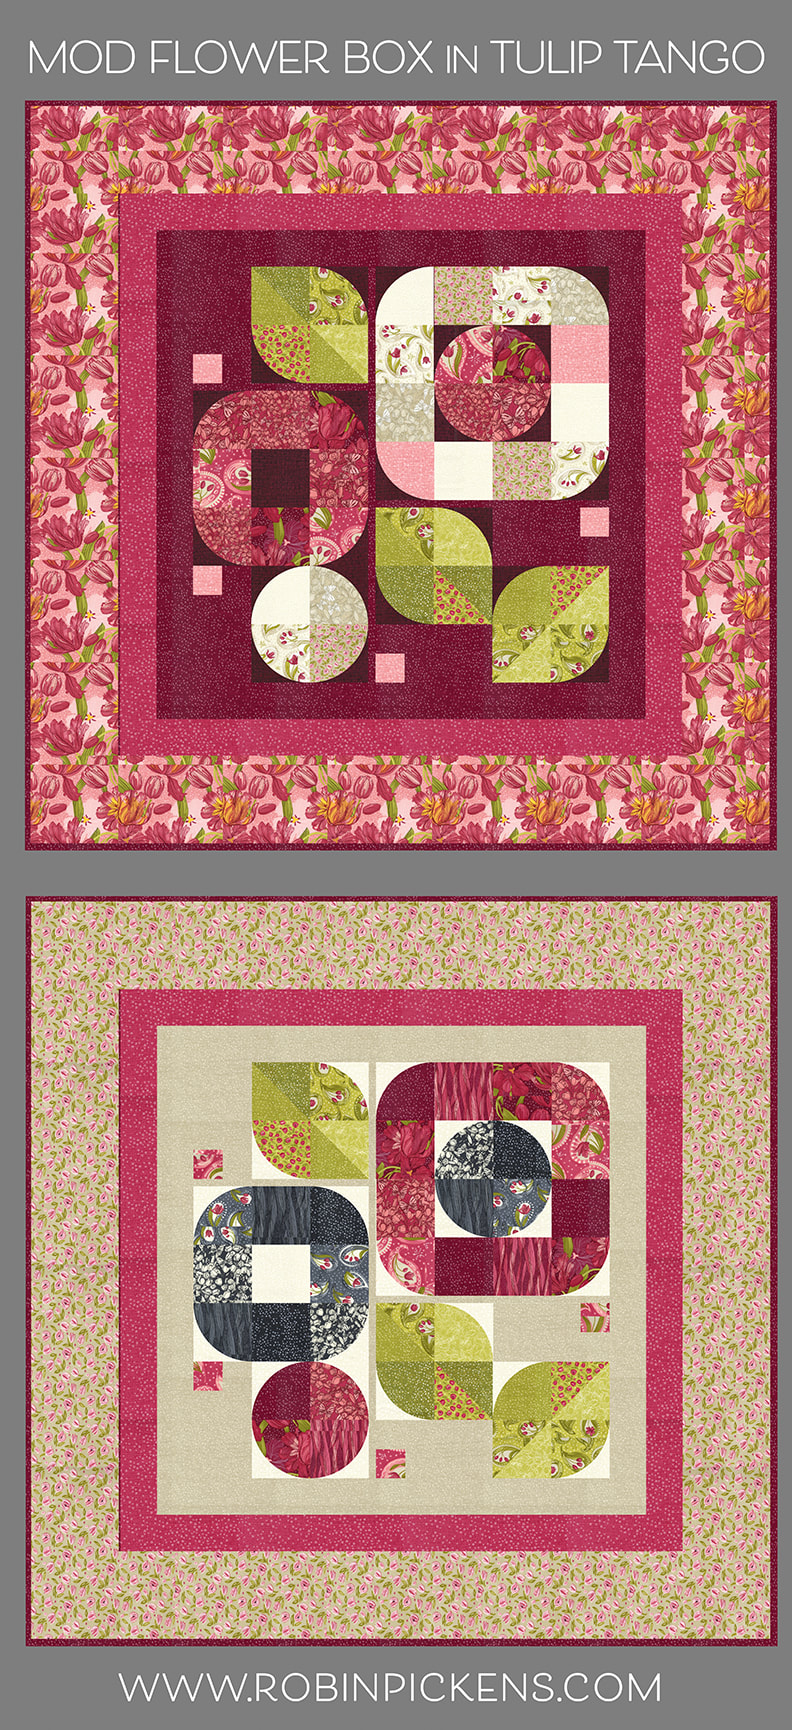 Mod Flower Box quilt in Tulip Tango from Robin Pickens